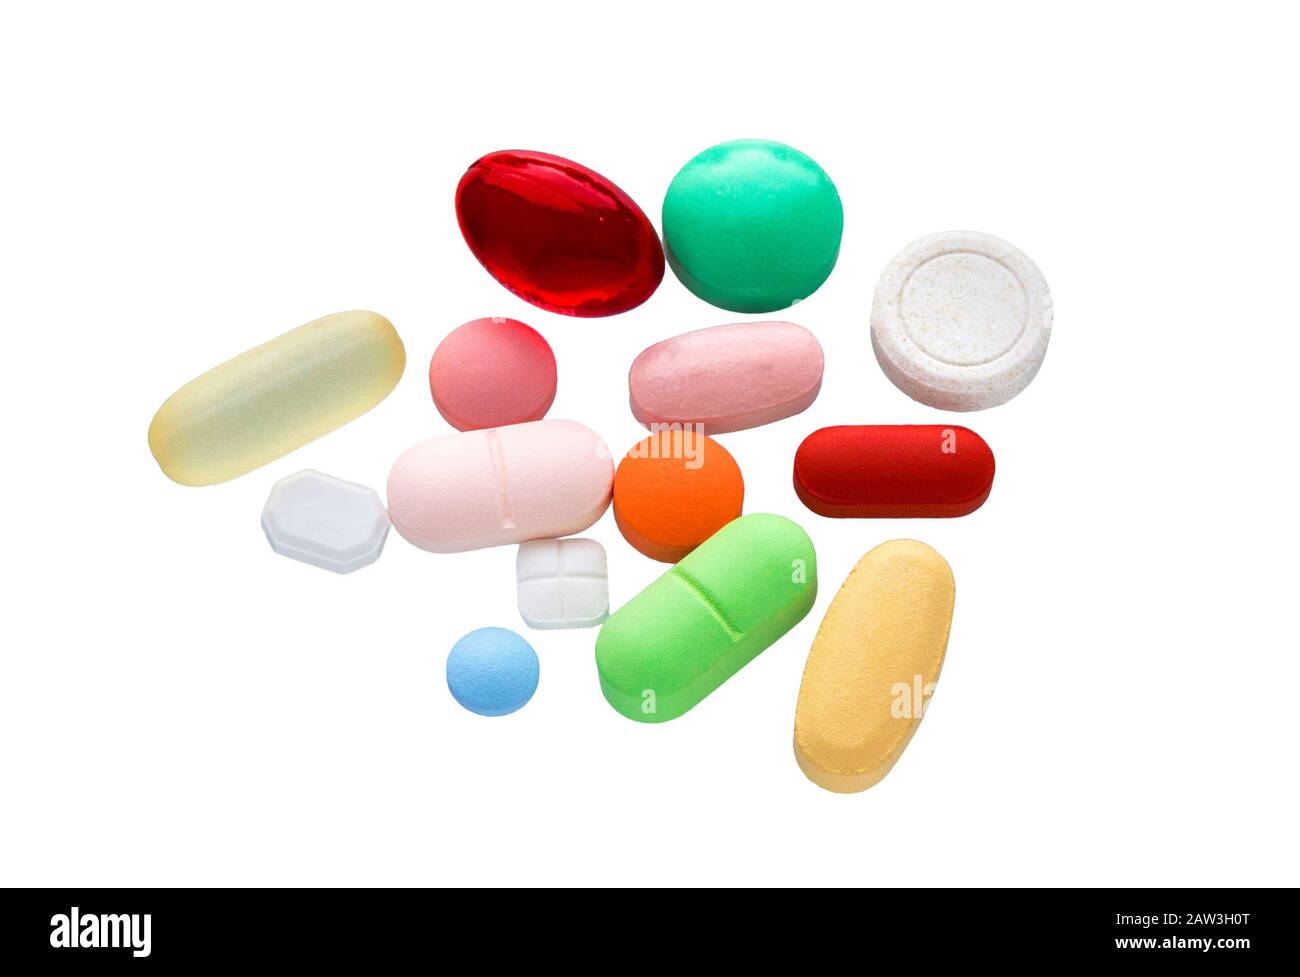 Pills, Tablets isolated on a white background. Colorful medicine pills. Stock Photo